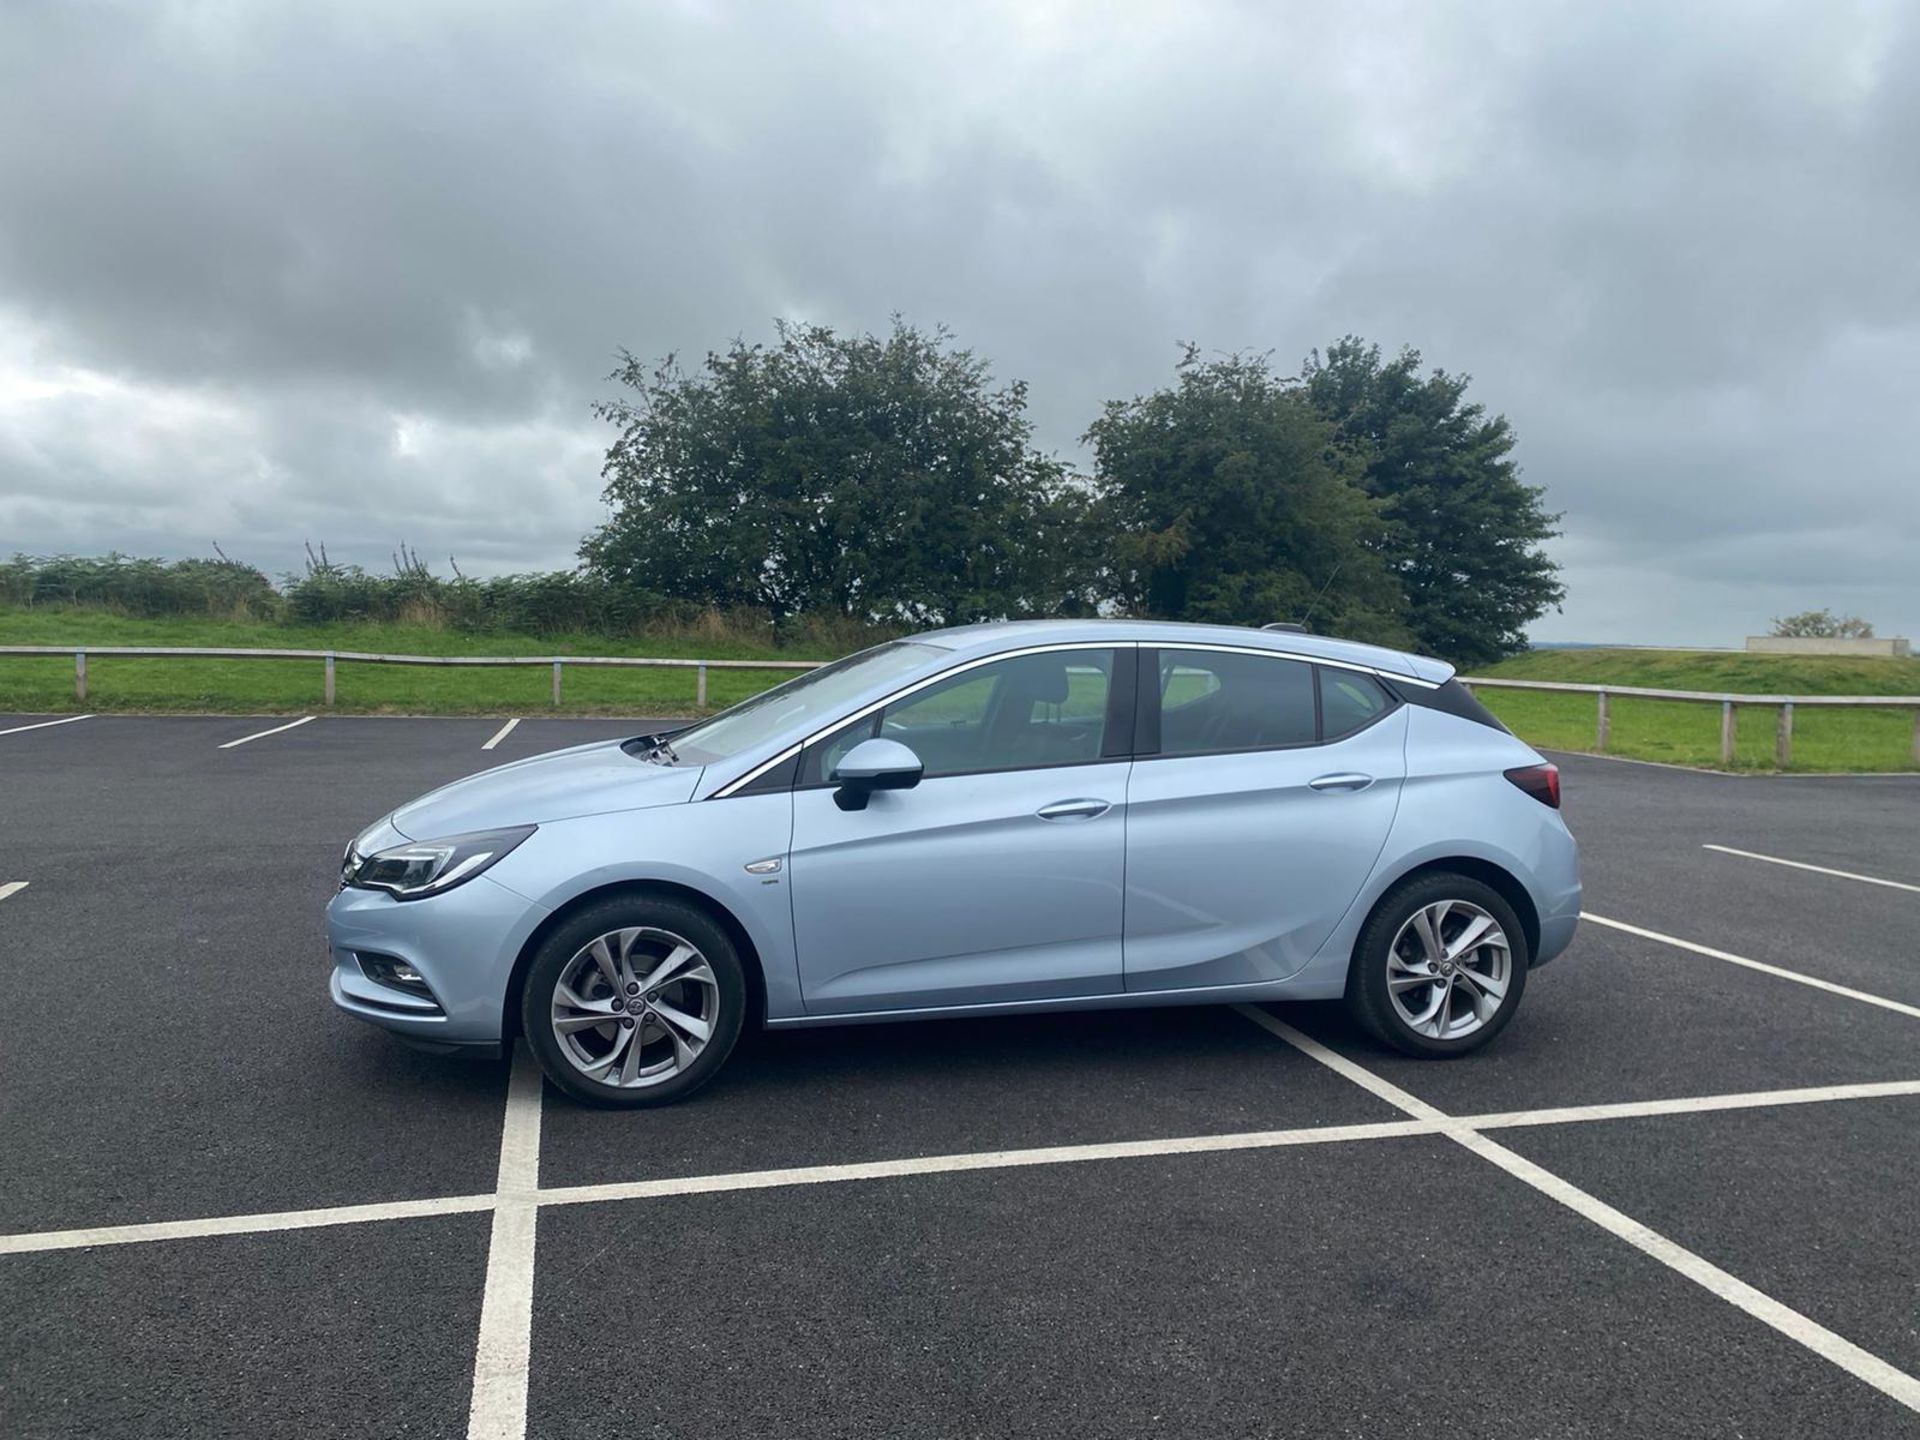 2018/18 REG VAUXHALL ASTRA SRI TURBO 1.4 PETROL SILVER 5 DOOR HATCHBACK, SHOWING 2 FORMER KEEPERS - Image 4 of 12